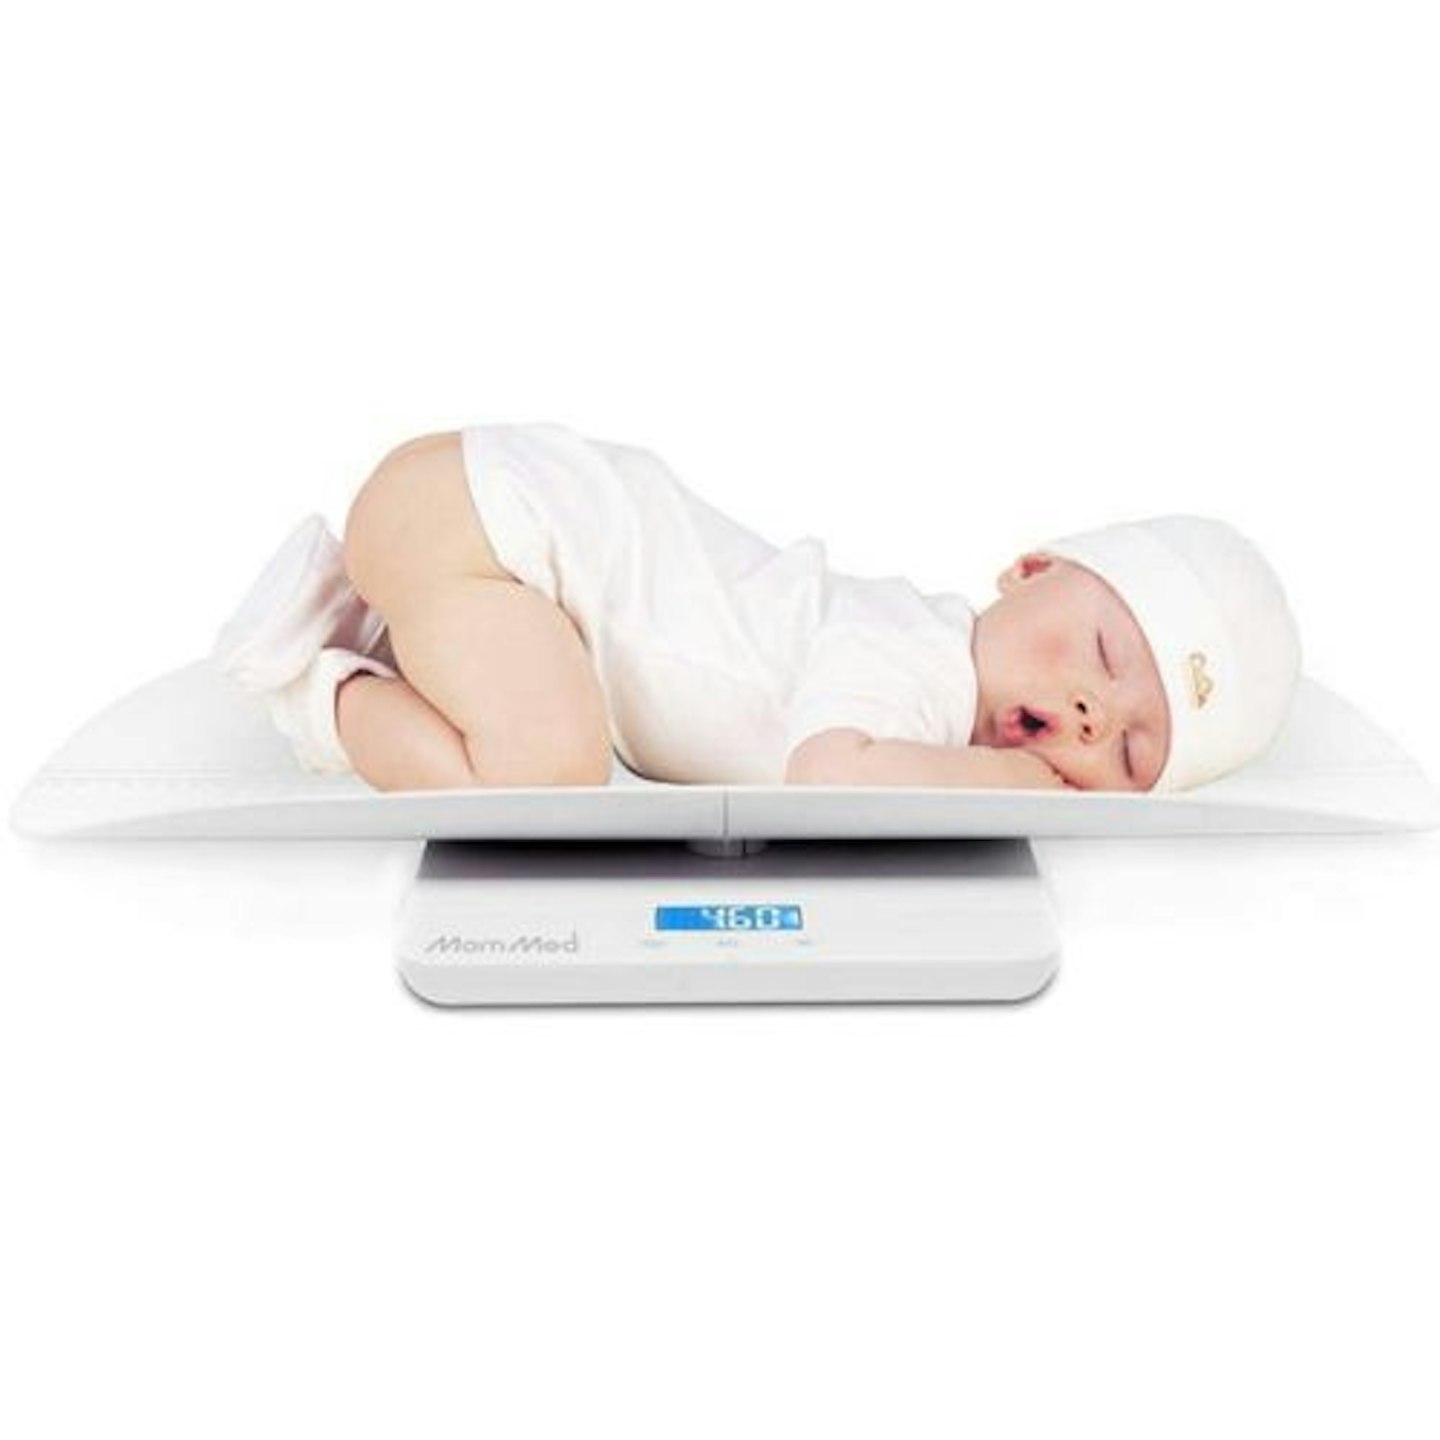 MOMMED weighing scales